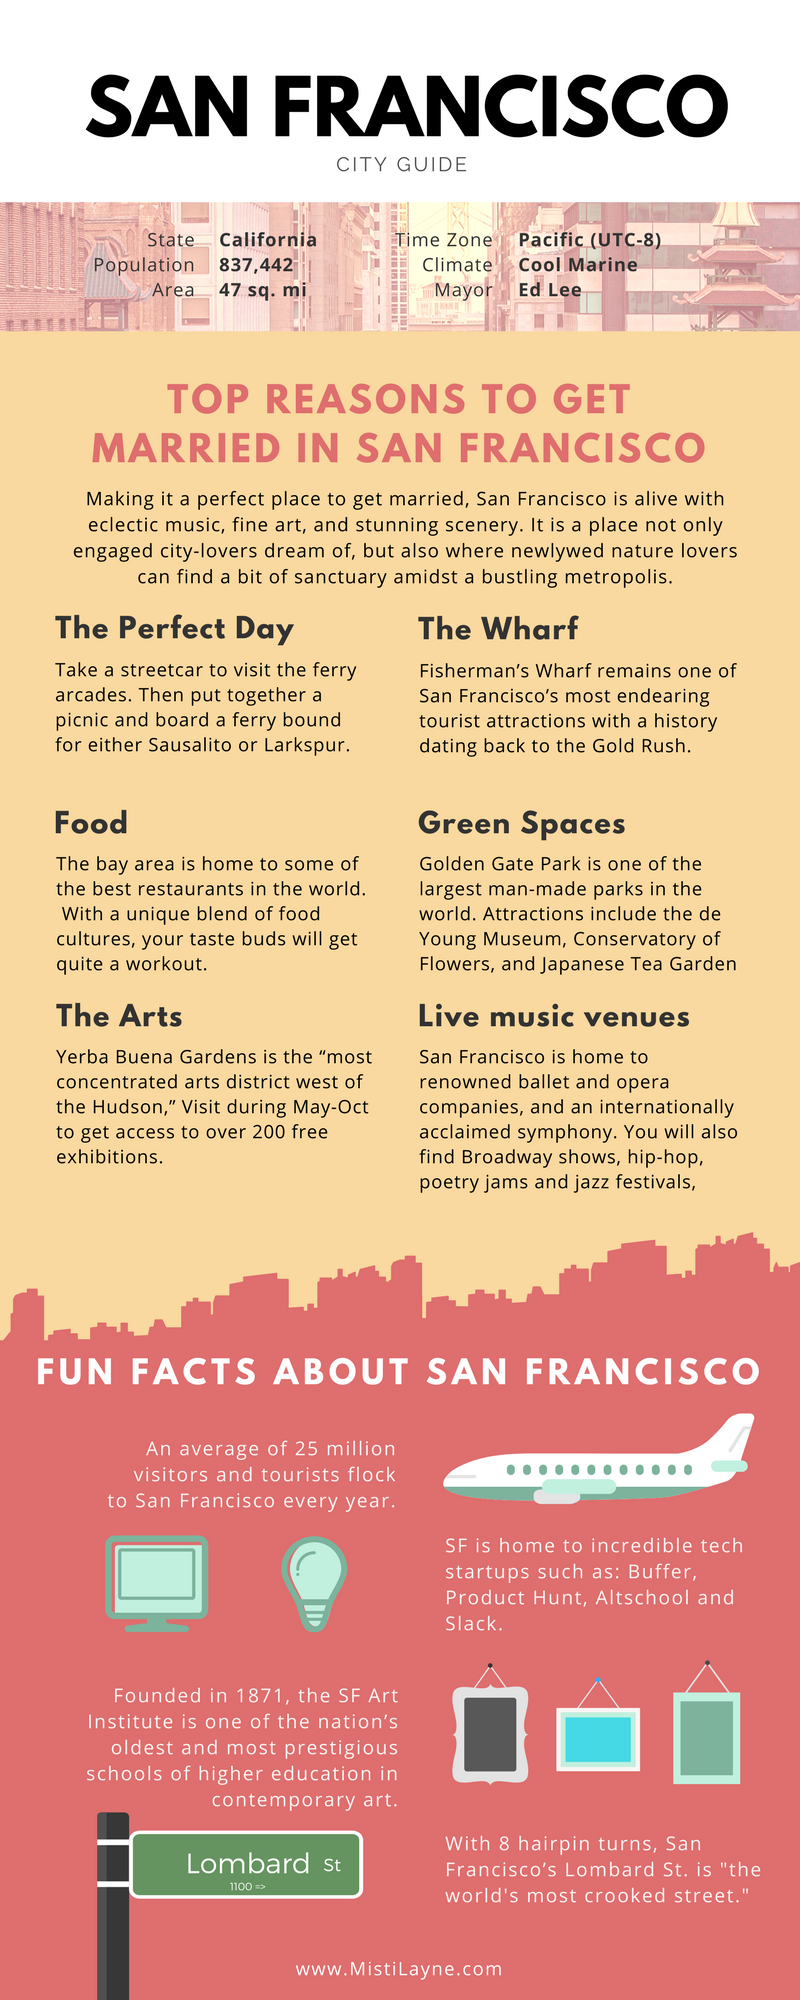 top reasons to get married in San Francisco